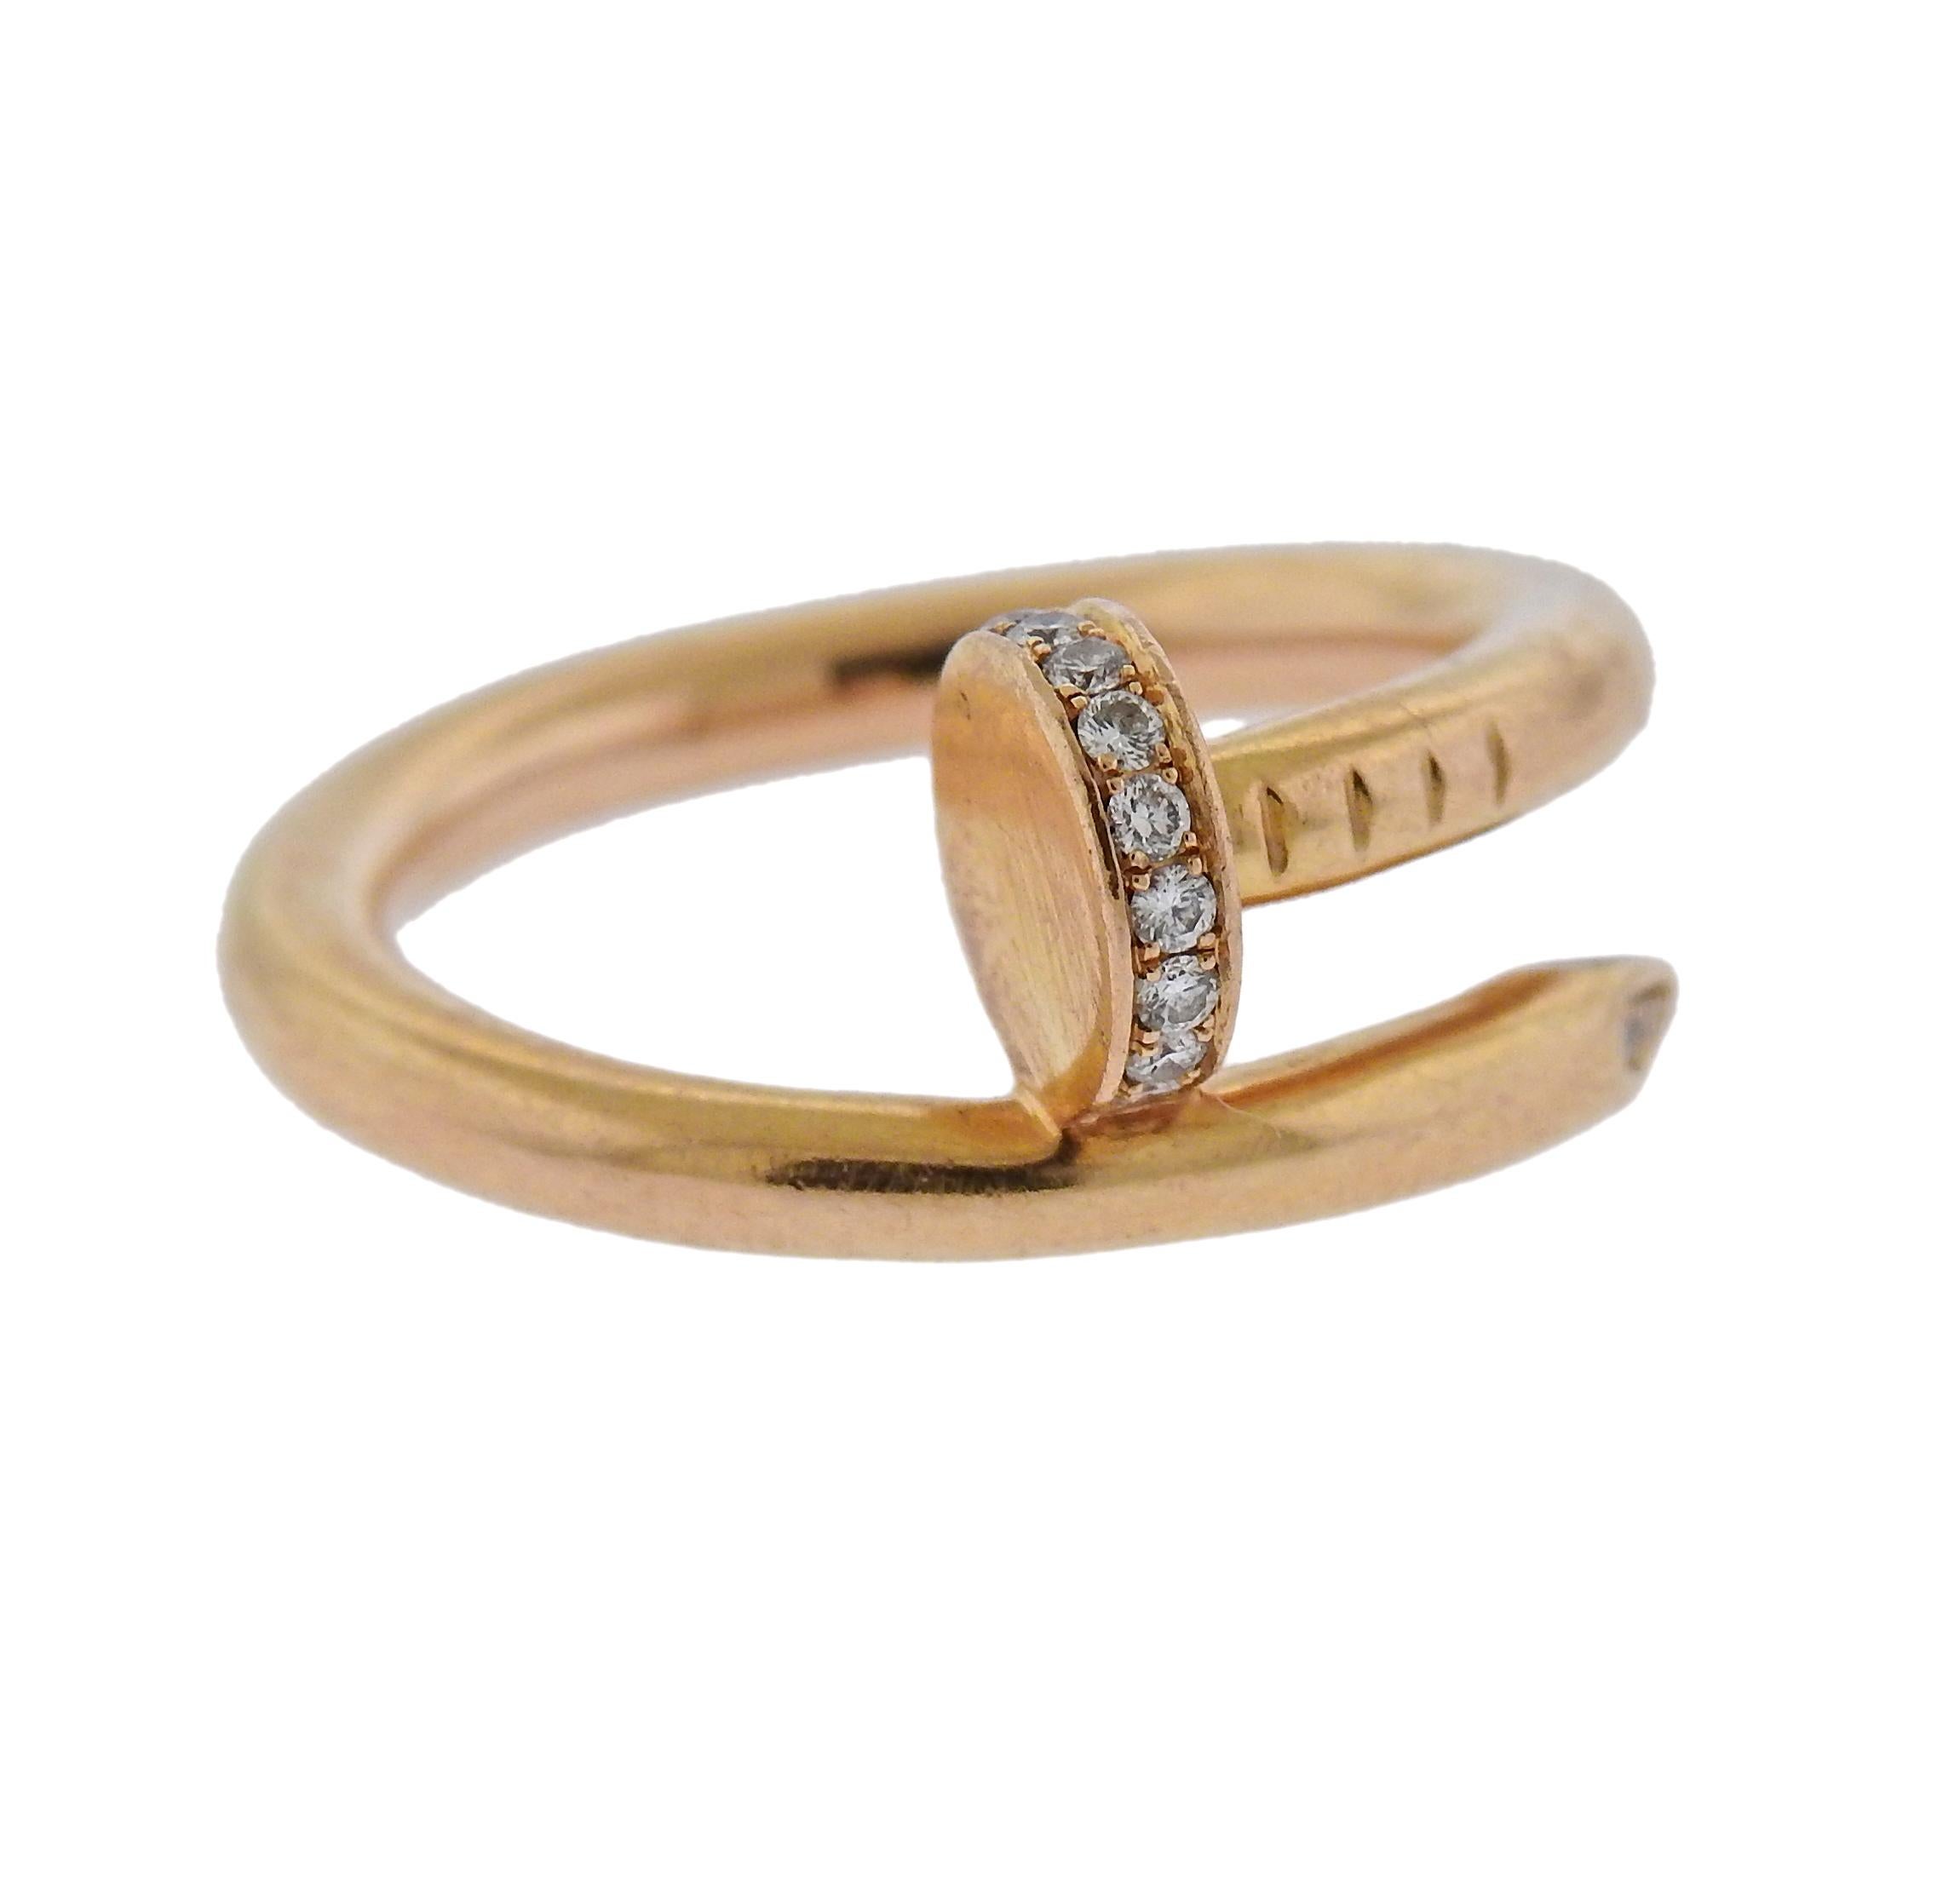 18k rose gold nail ring from current Juste Un Clou collection, adorned with 0.13ctw in G/VS diamonds. Retail $3800. Ring size - 6, width of the top is 10mm and weighs 7.4 grams. Marked Cartier, 750, 52, SJ8133.